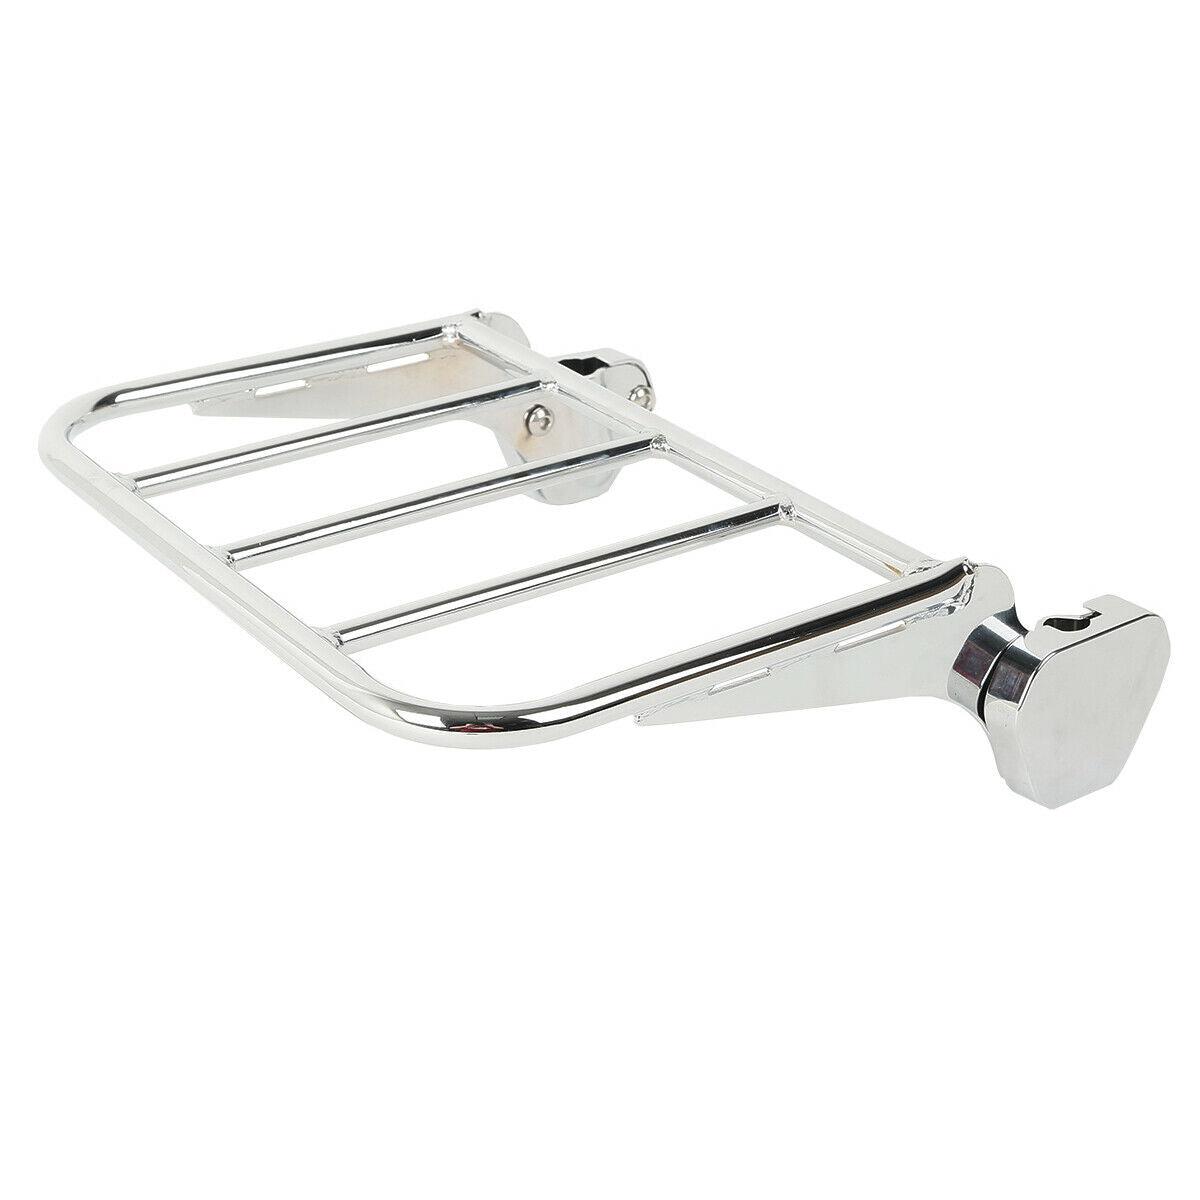 Luggage Rack Fit For Harley Touring Road King Street Glide 1997-2008 2007 2006 - Moto Life Products